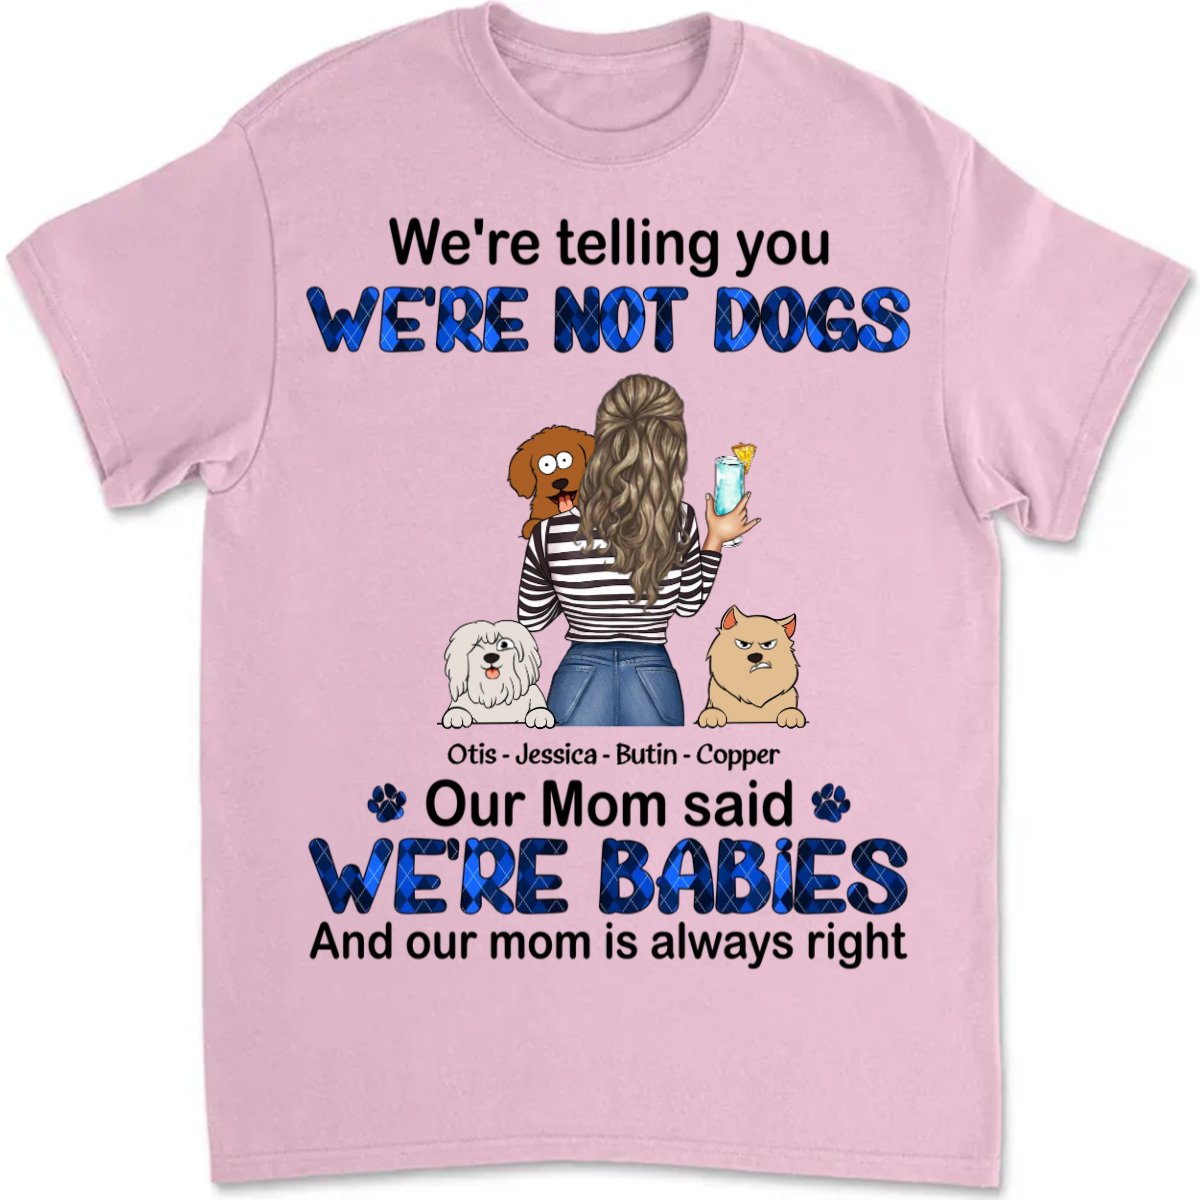 Dog Lovers - We're Babies And Our Mom Is Always Right - Personalized T - shirt (LH) - The Next Custom Gift